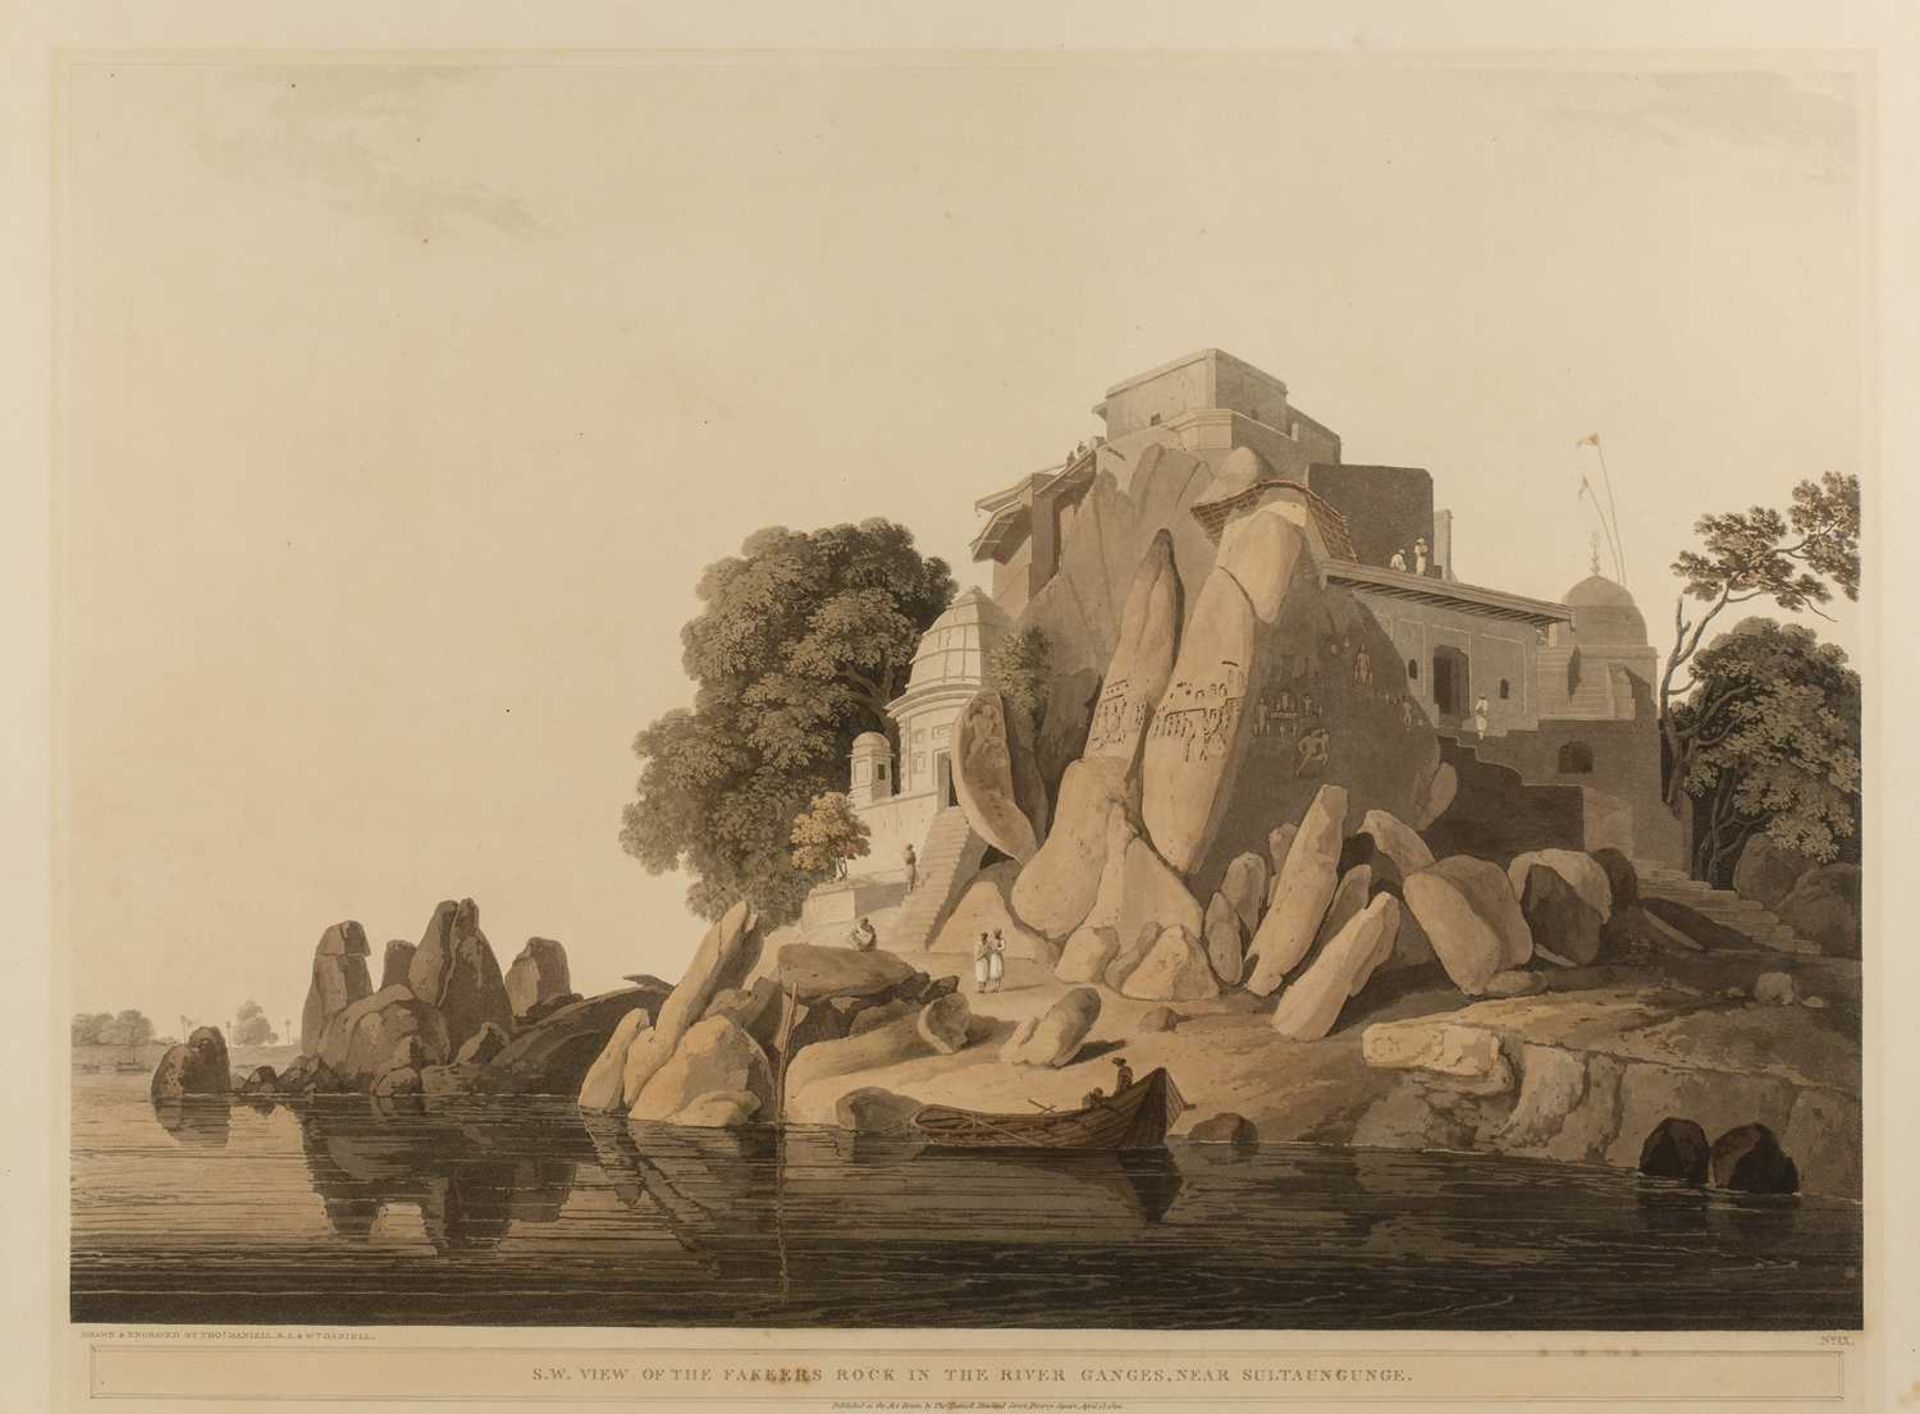 Thomas William Daniell 'S.W. View of the Fakeers Rock in the River Ganges, near Sultanganj', plate